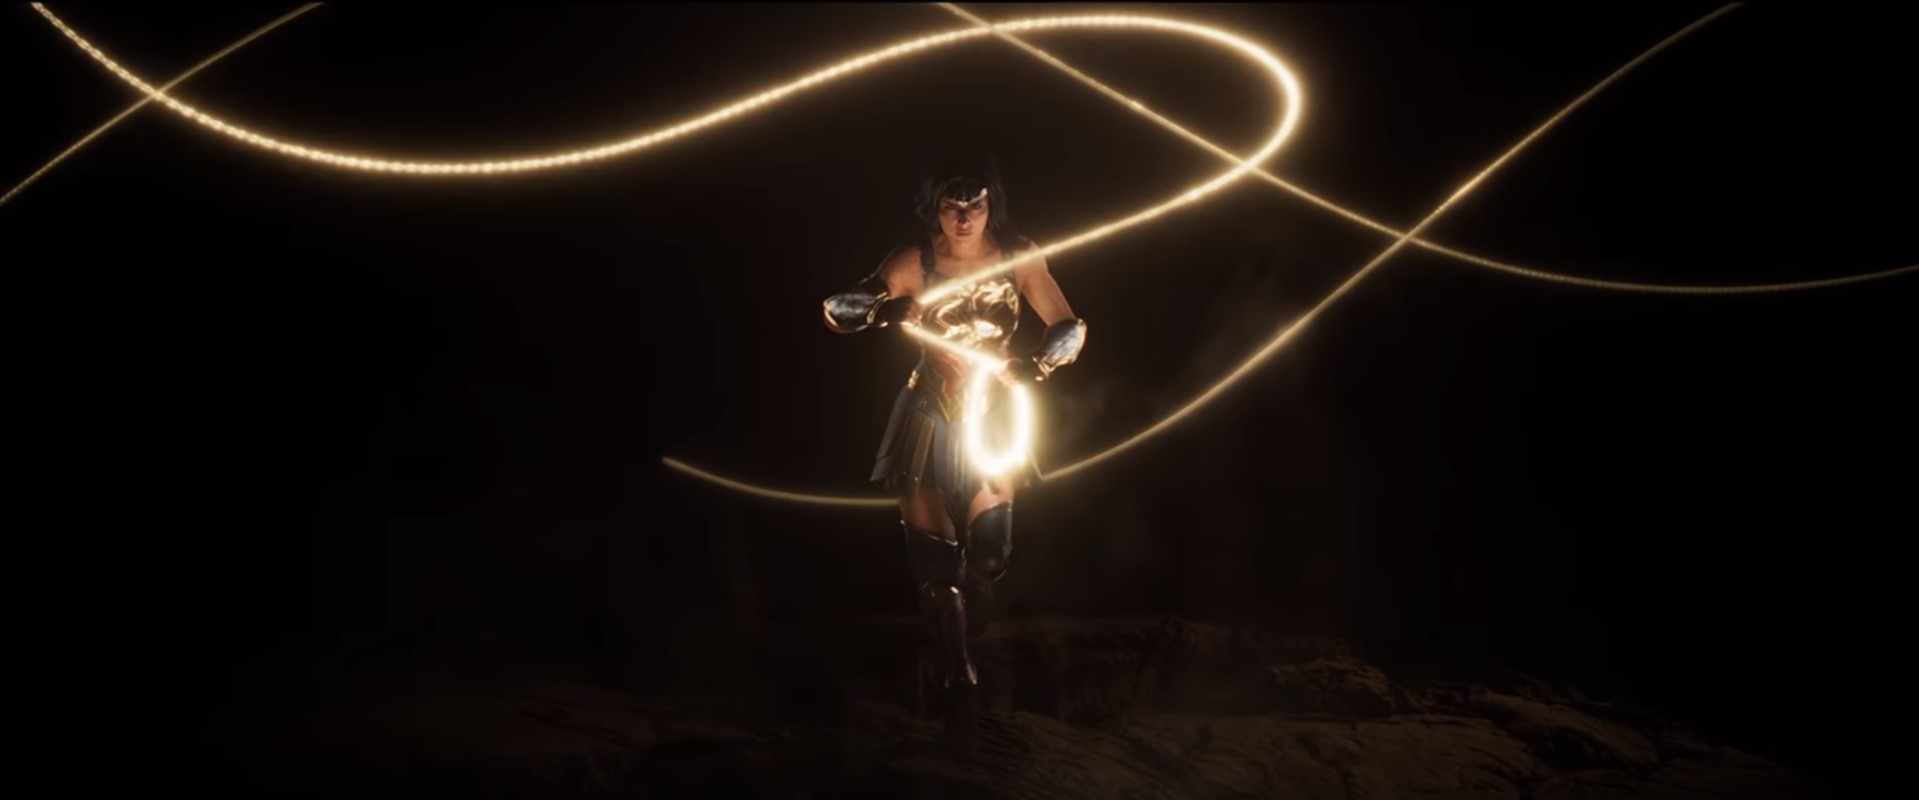 Warner Bros. Has Denied Reports That Wonder Woman Will Be Live Service Game